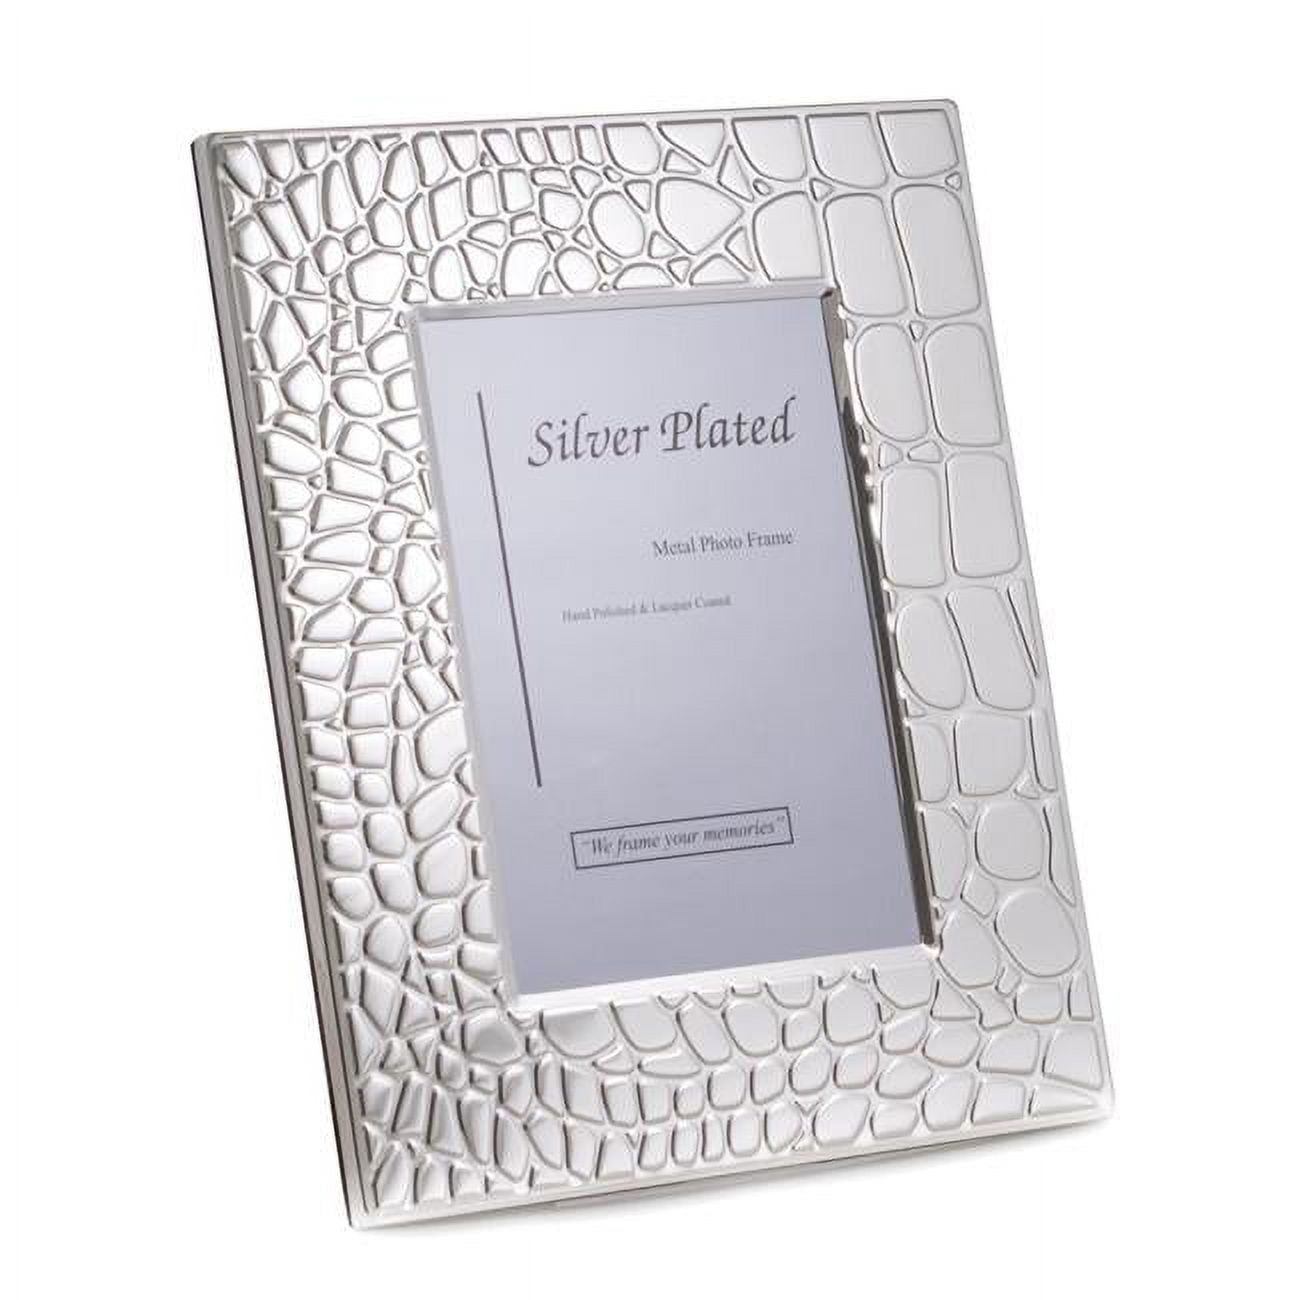 Picture of Bey-Berk International SF110-09 4 x 6 in. Silver Plated with Croco Design Picture Frame with Easel Back 